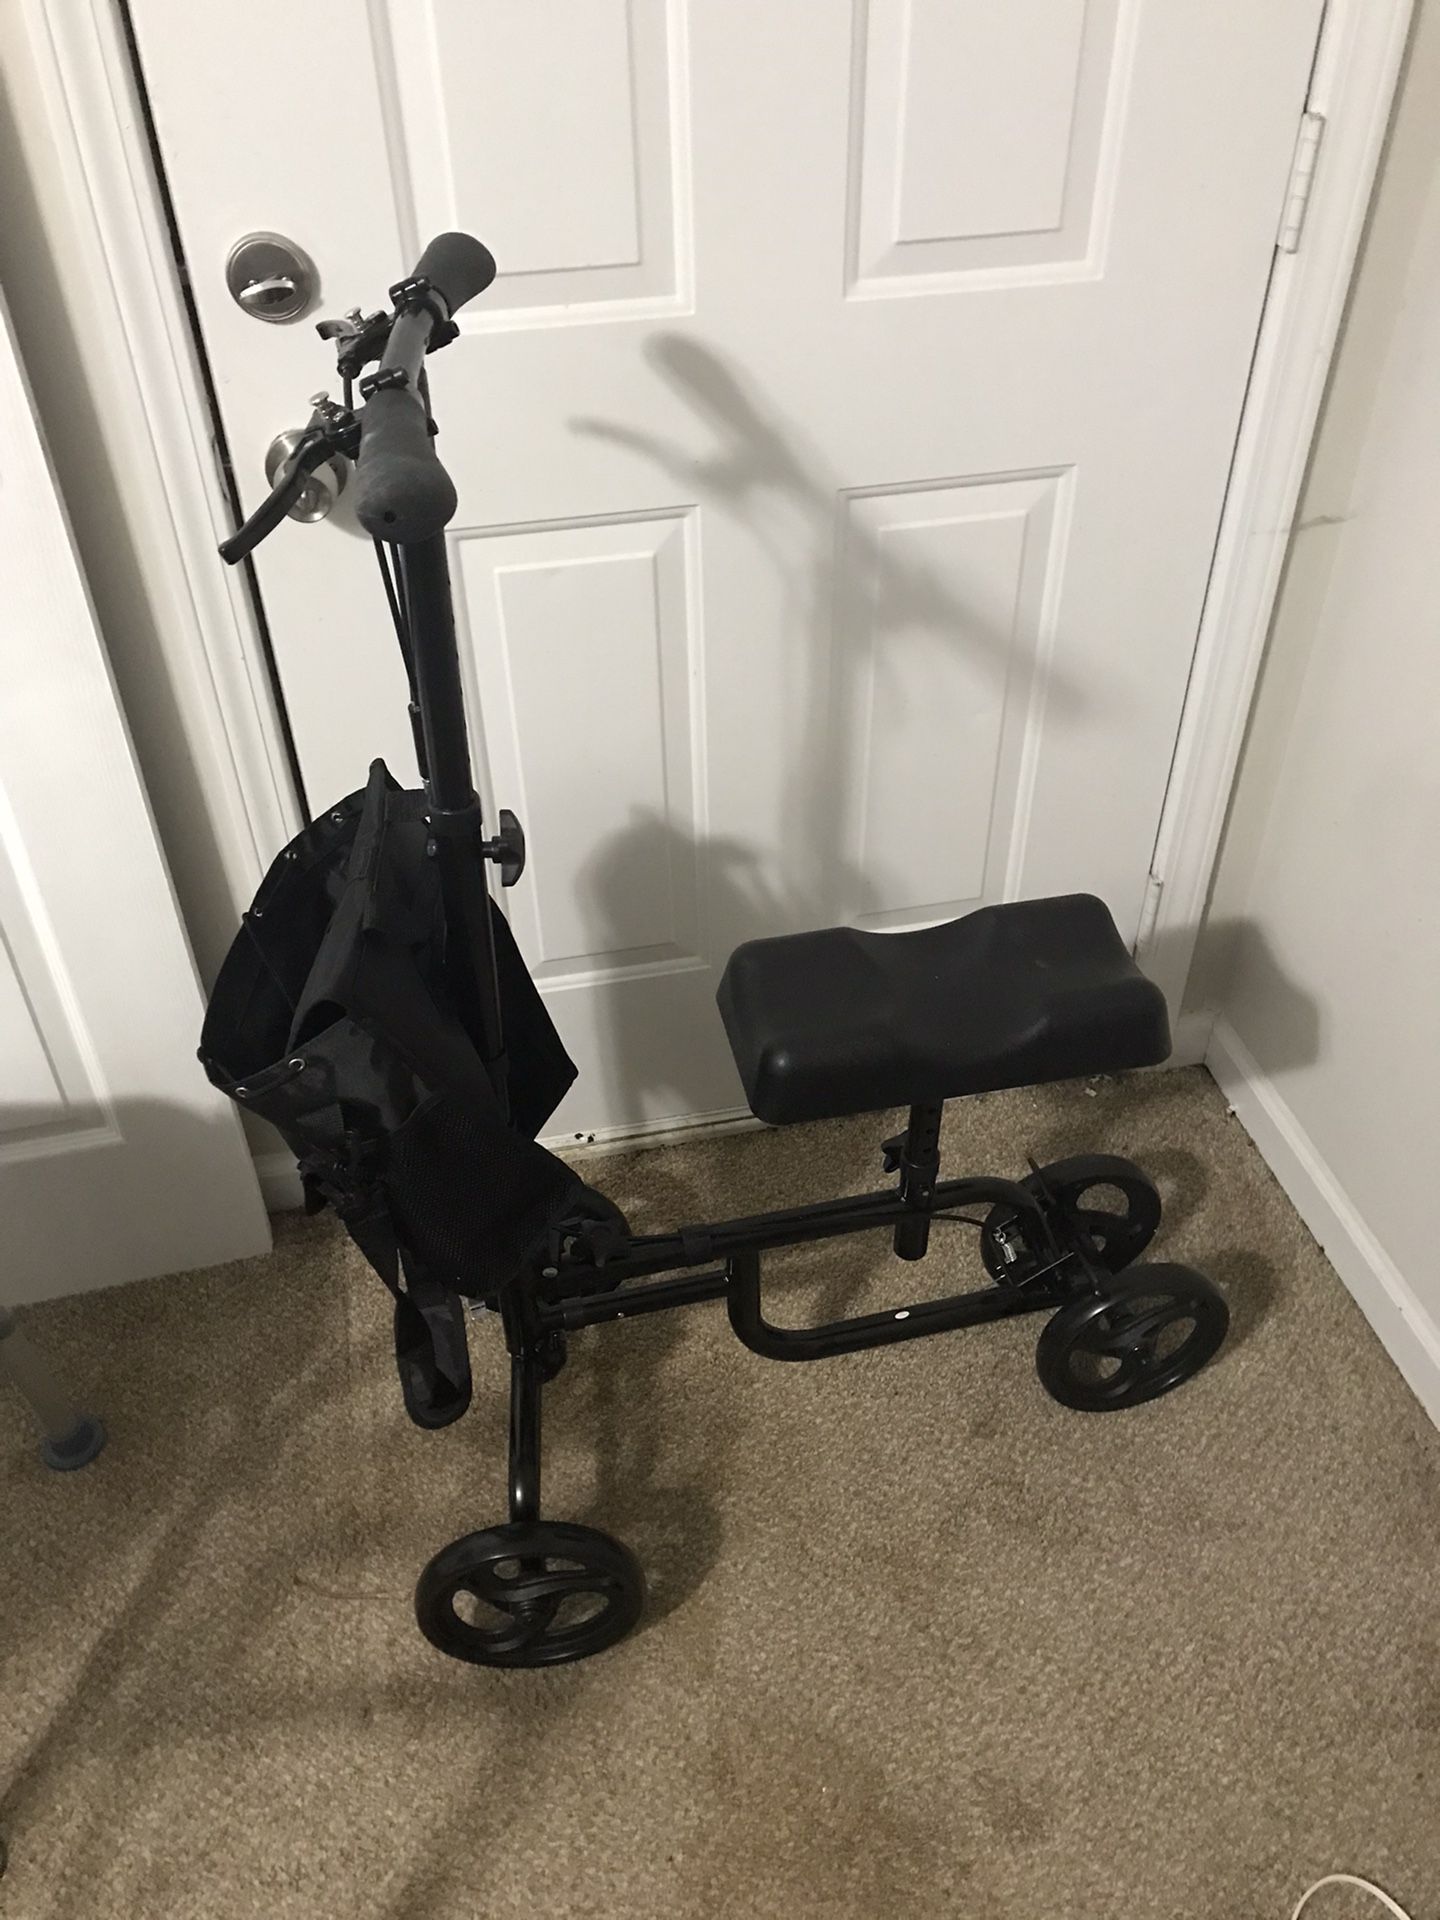 Knee Scooter For Sale